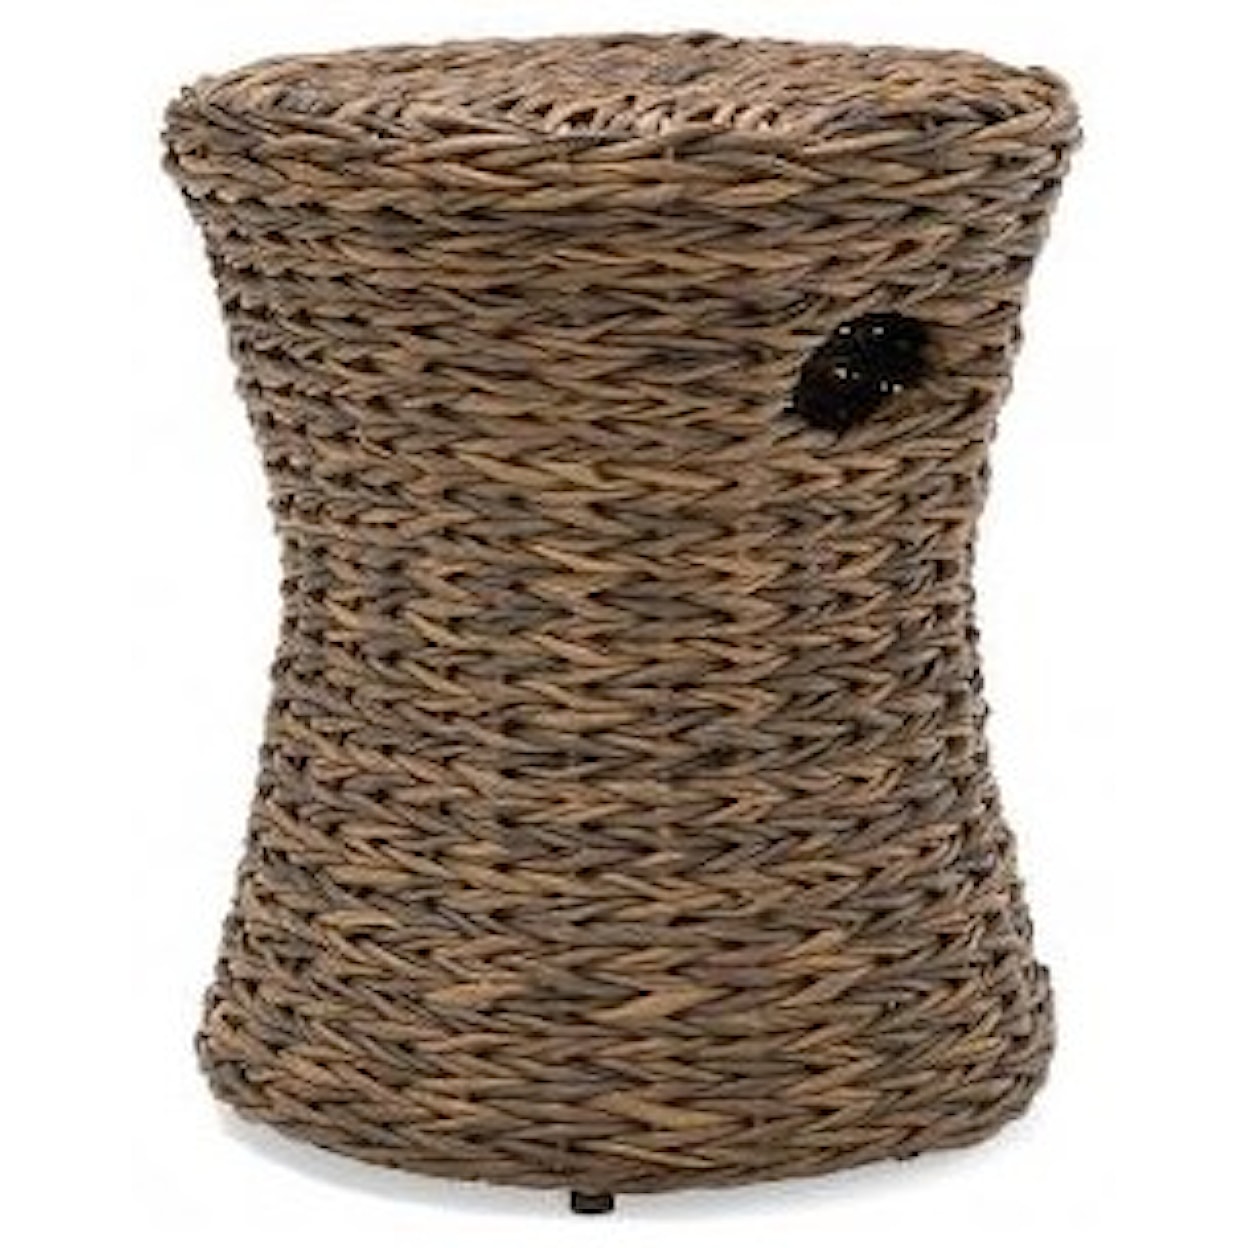 Winston Cayman Woven Drum Stool/Side Table